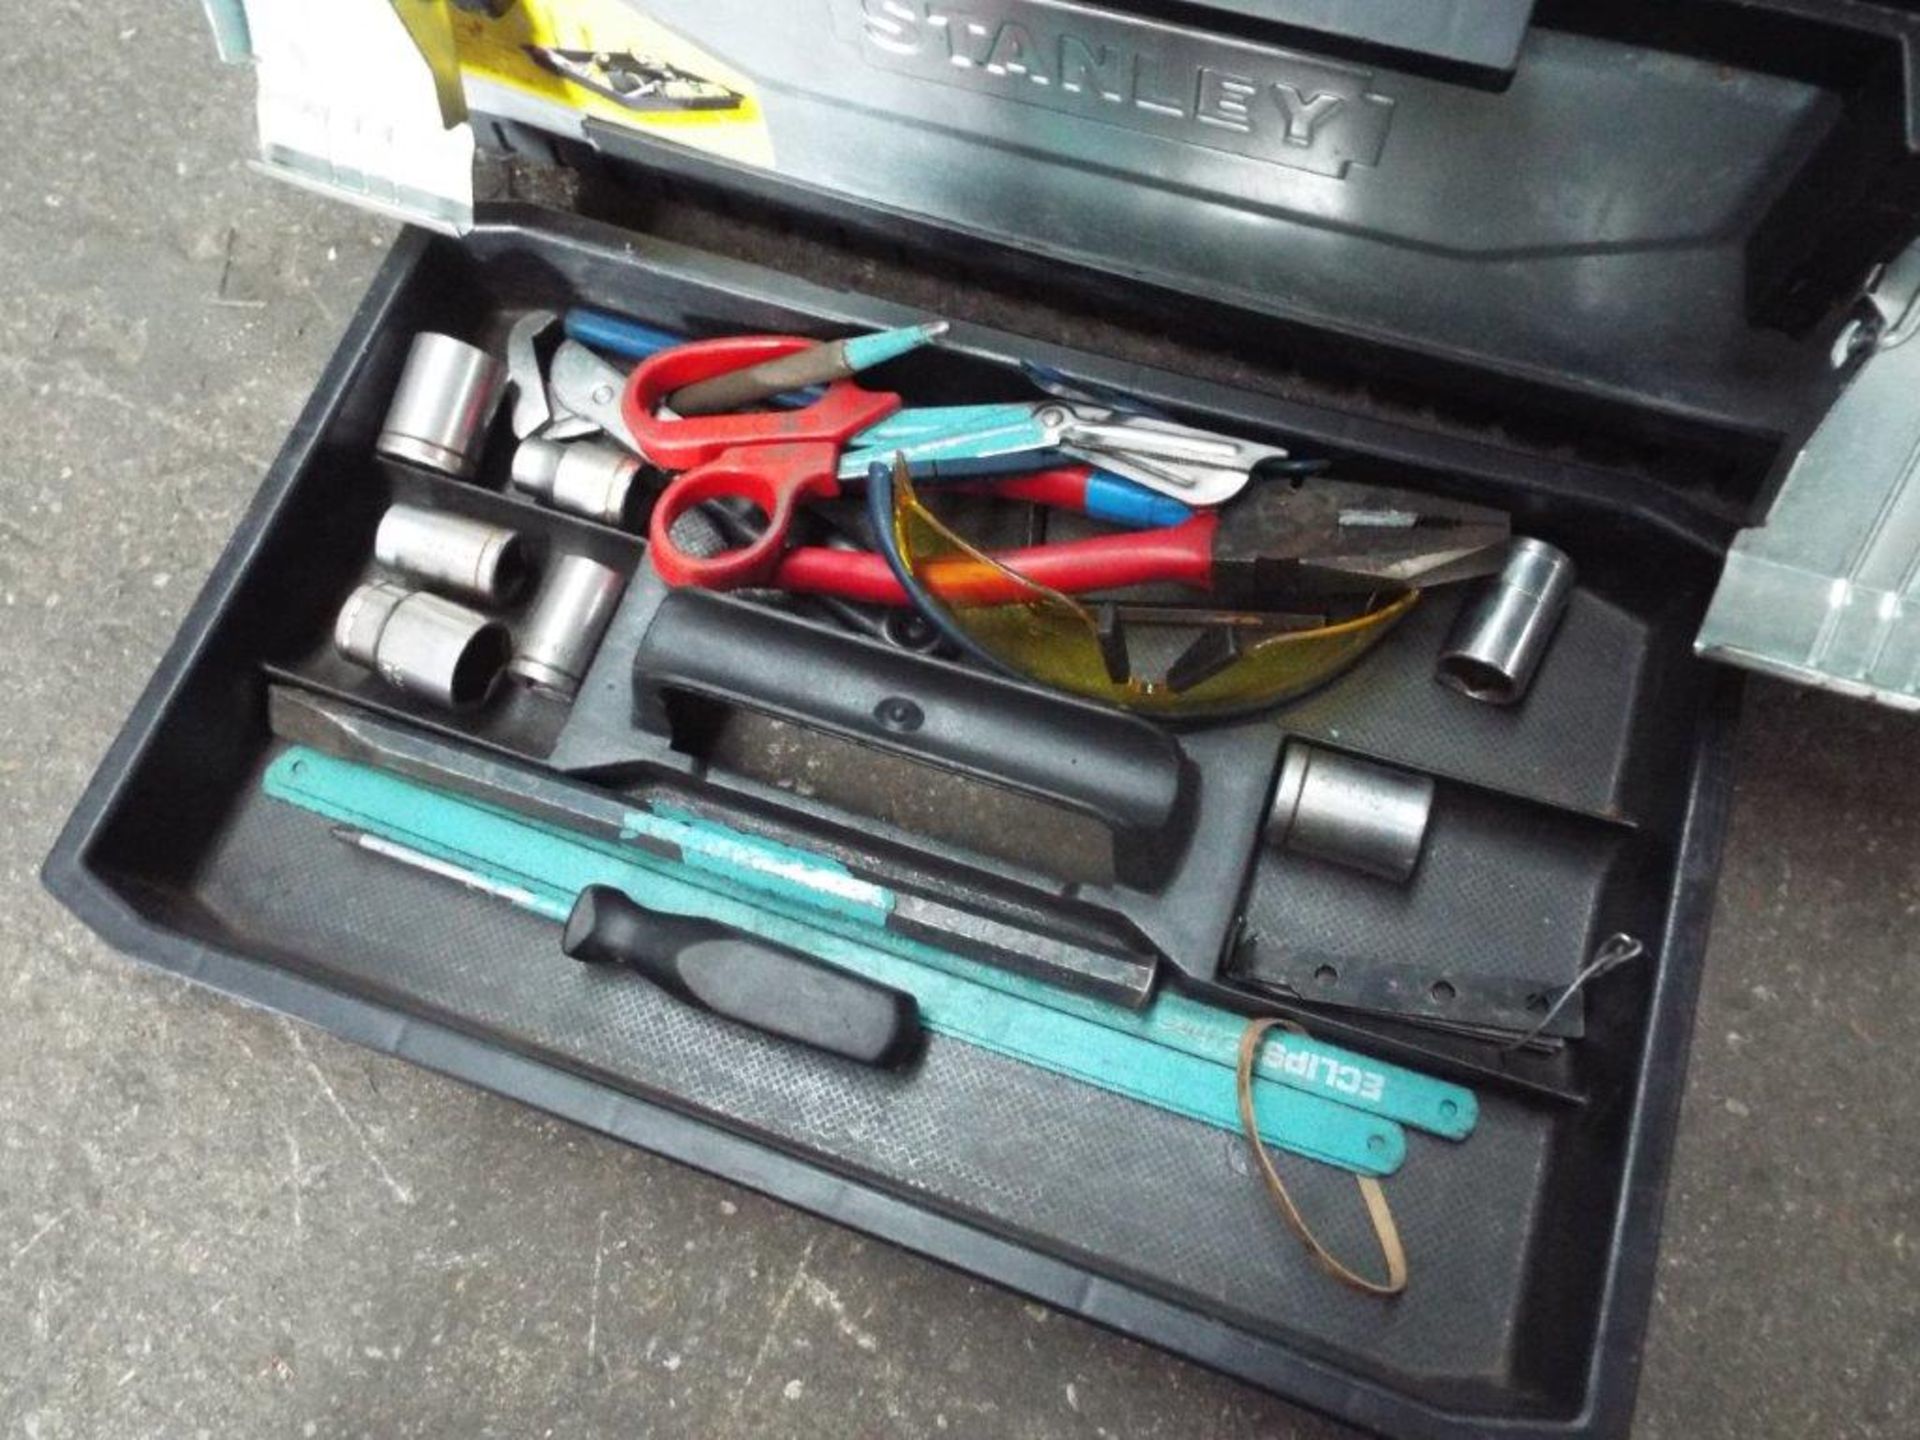 Stanley 23" Tool Box Complete with a Selection of Tools - Image 3 of 6